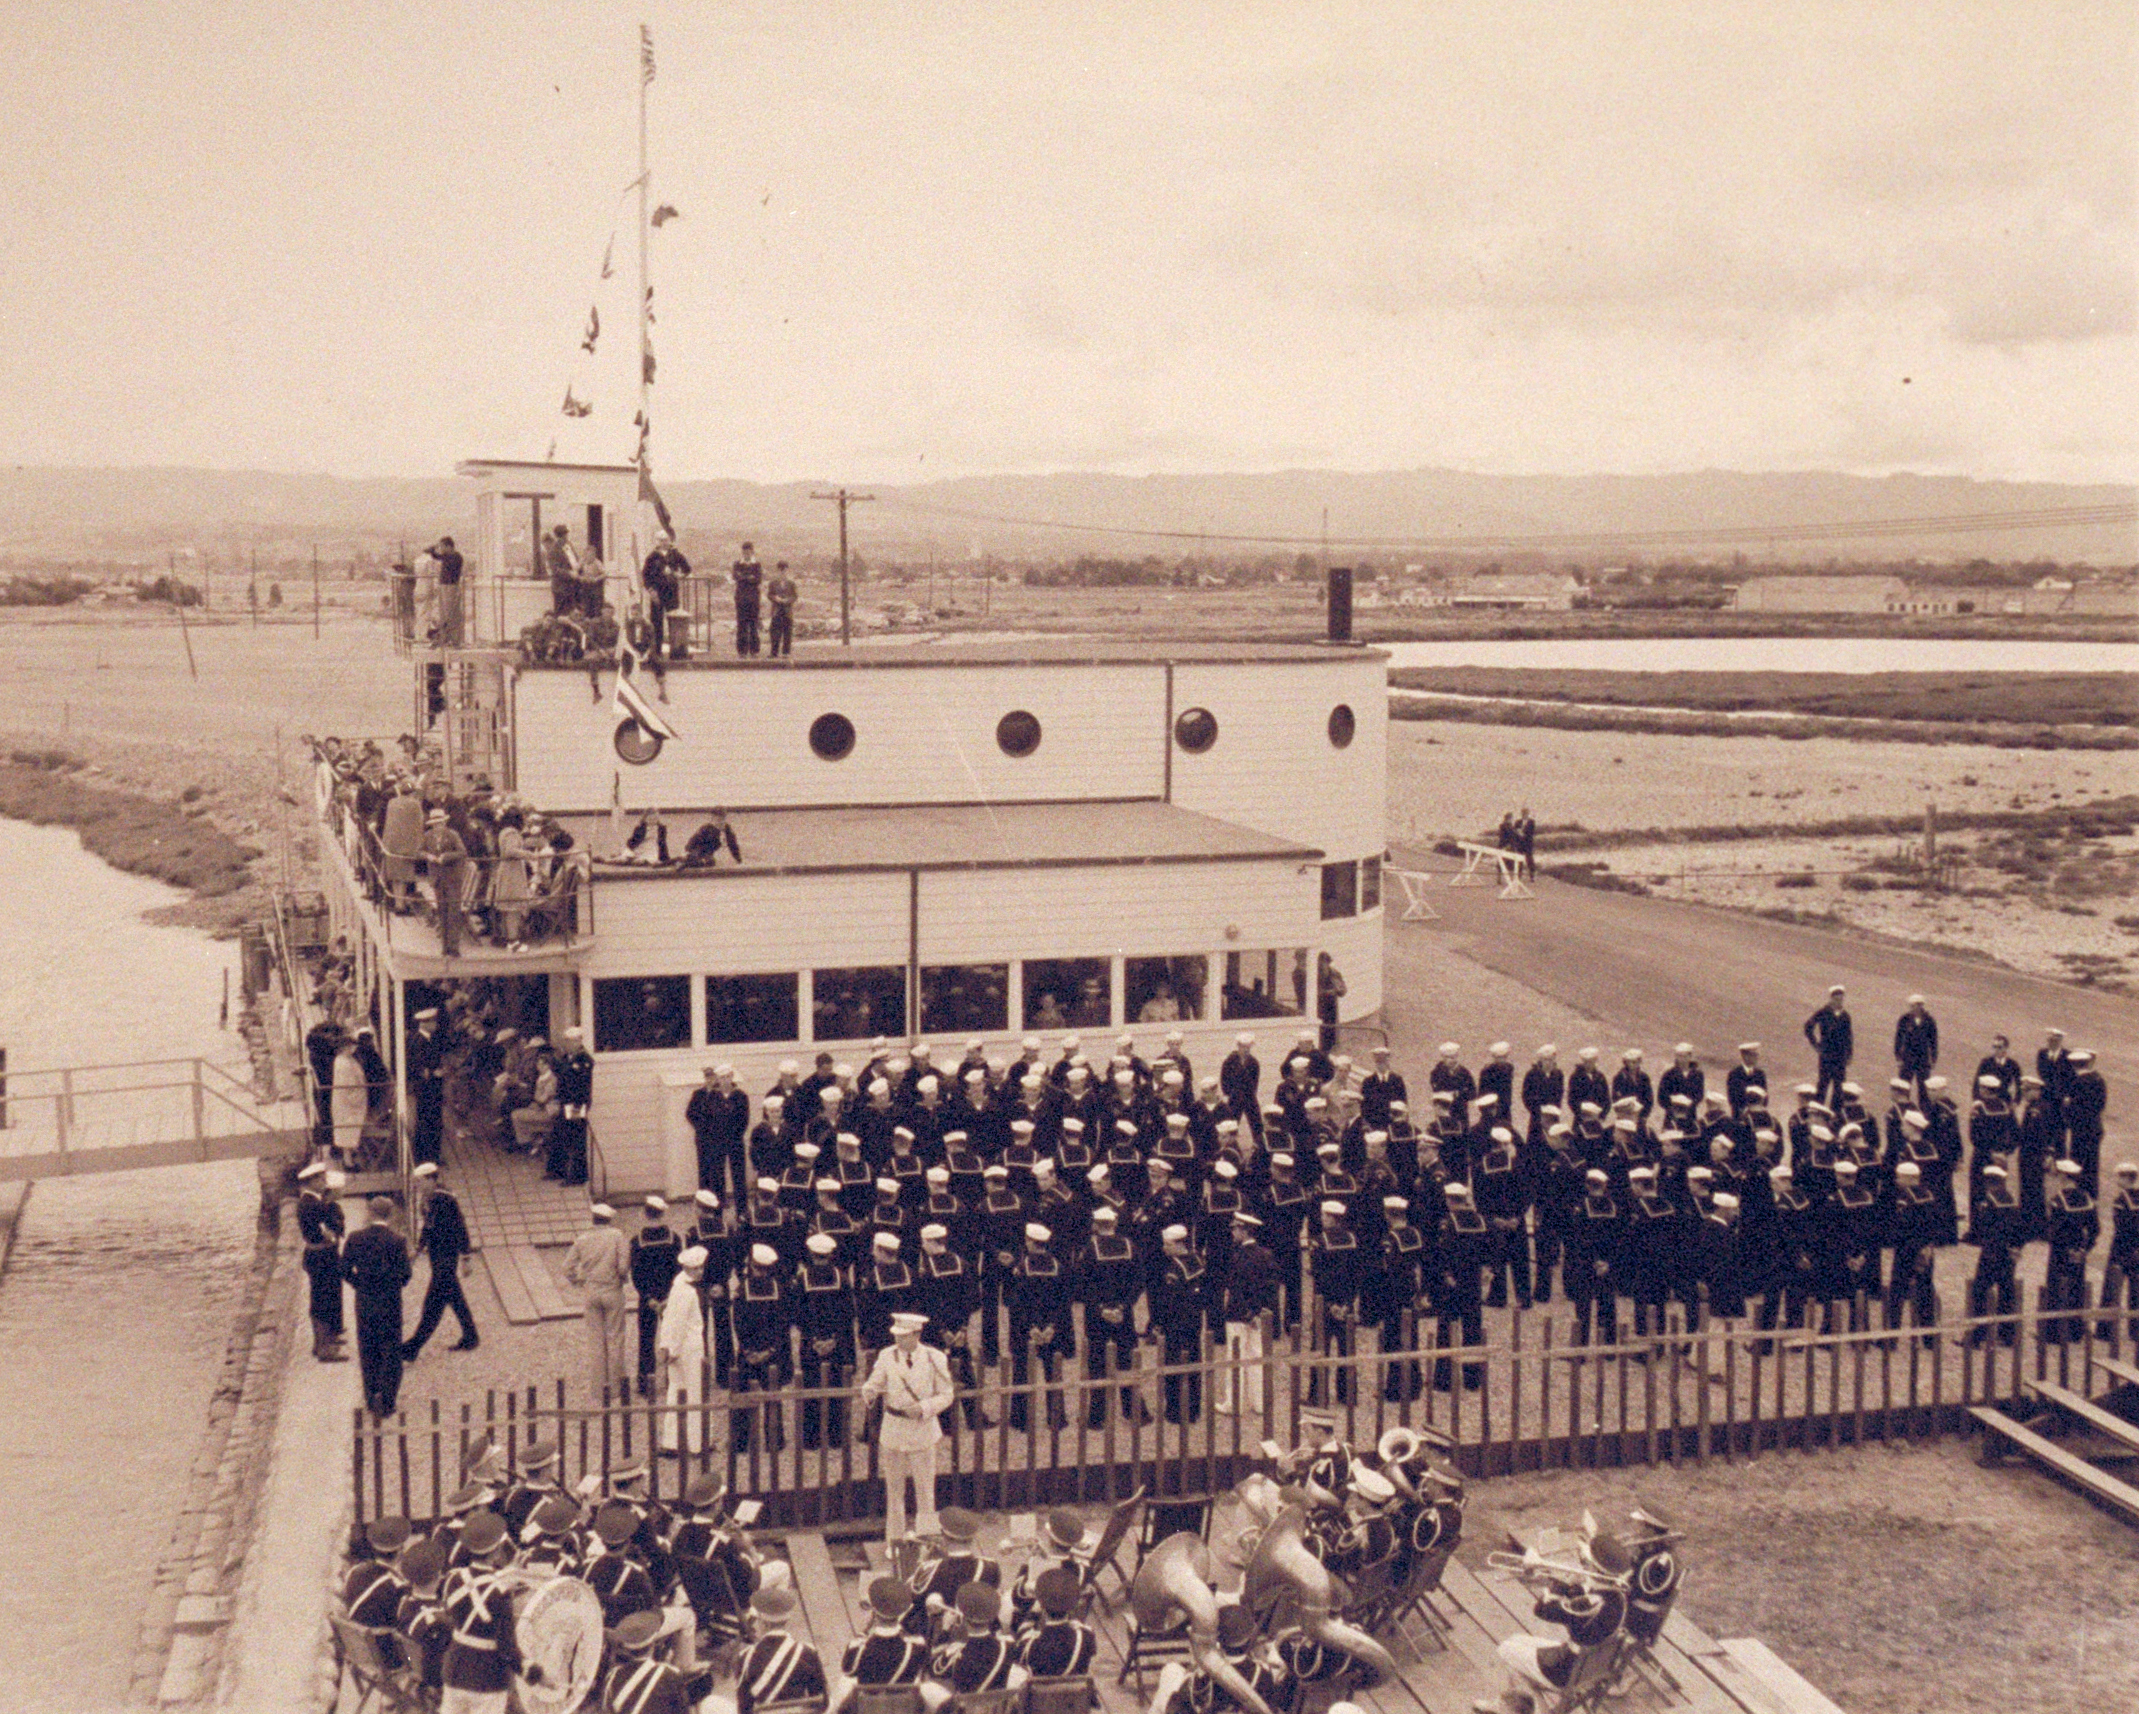 A sepia toned photograph shows rows of young men in maritime uniforms in front of an Art Deco building that looks like a boat. What looks like a military band plays in foreground.